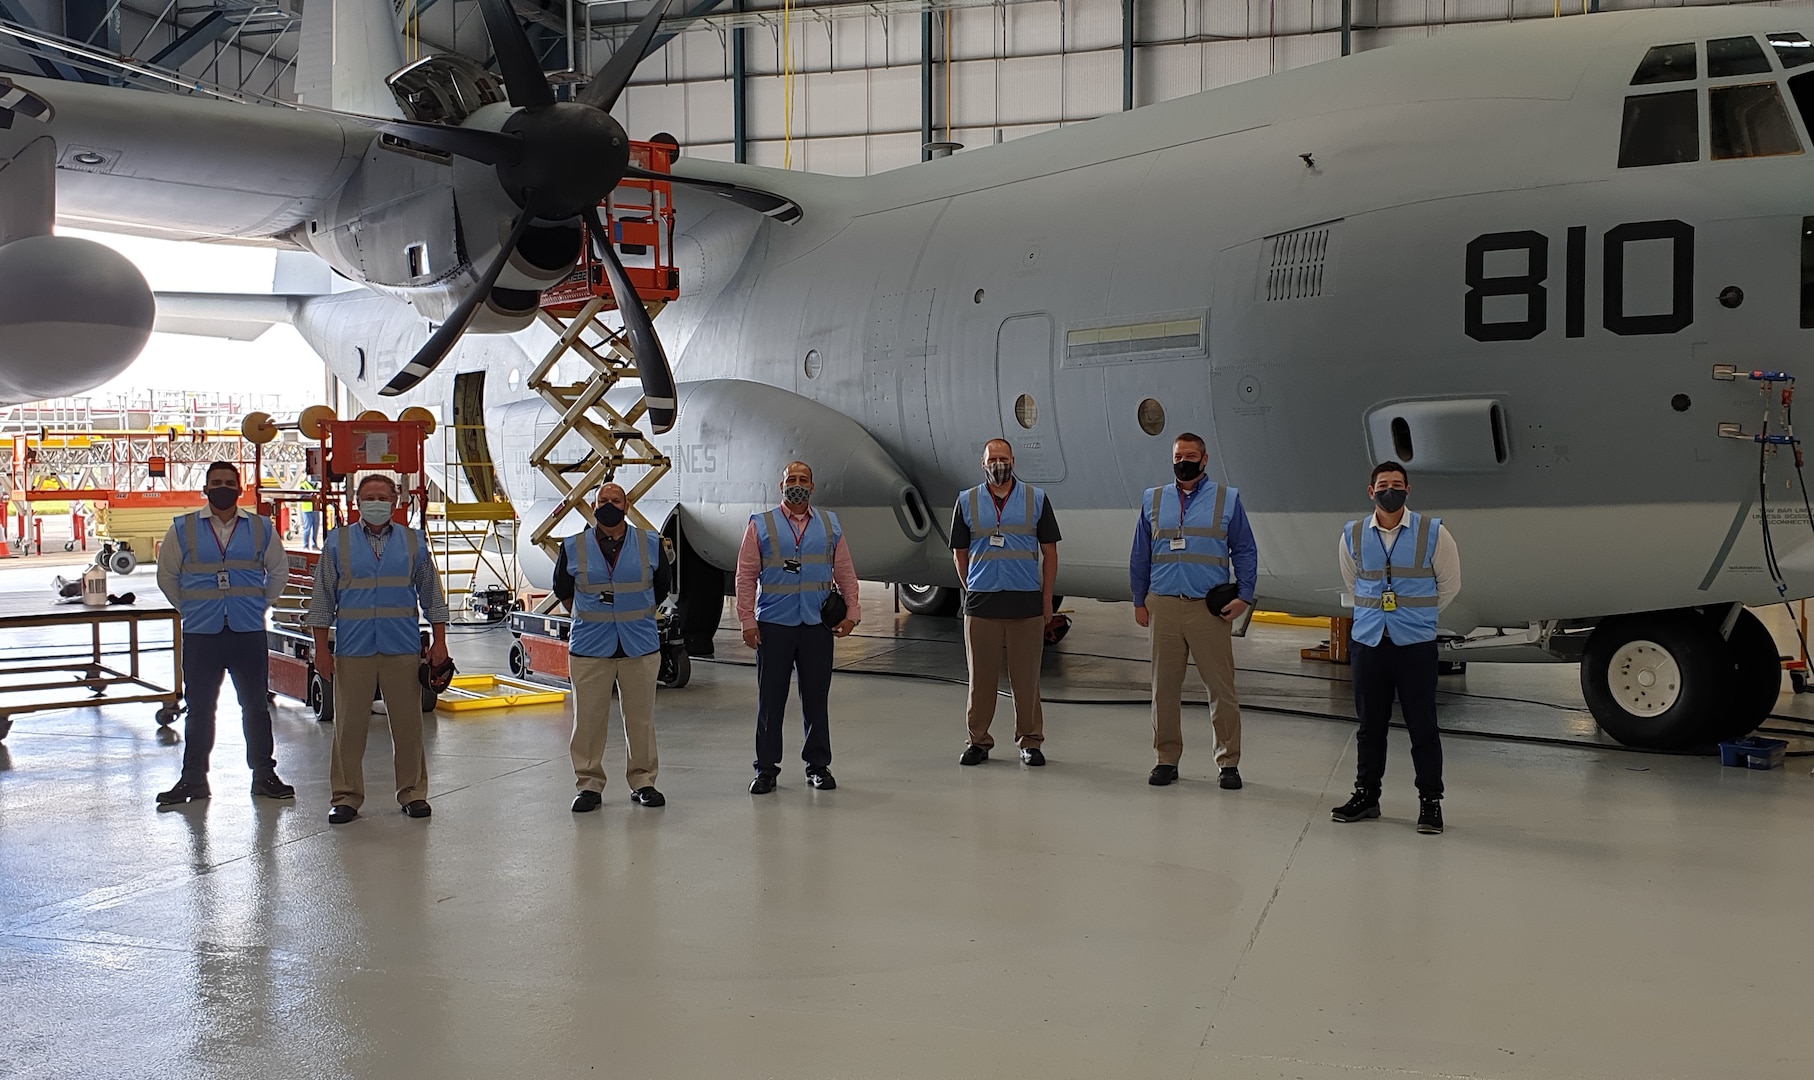 Seven personnel pose in front of an aircraft inside a hangar.